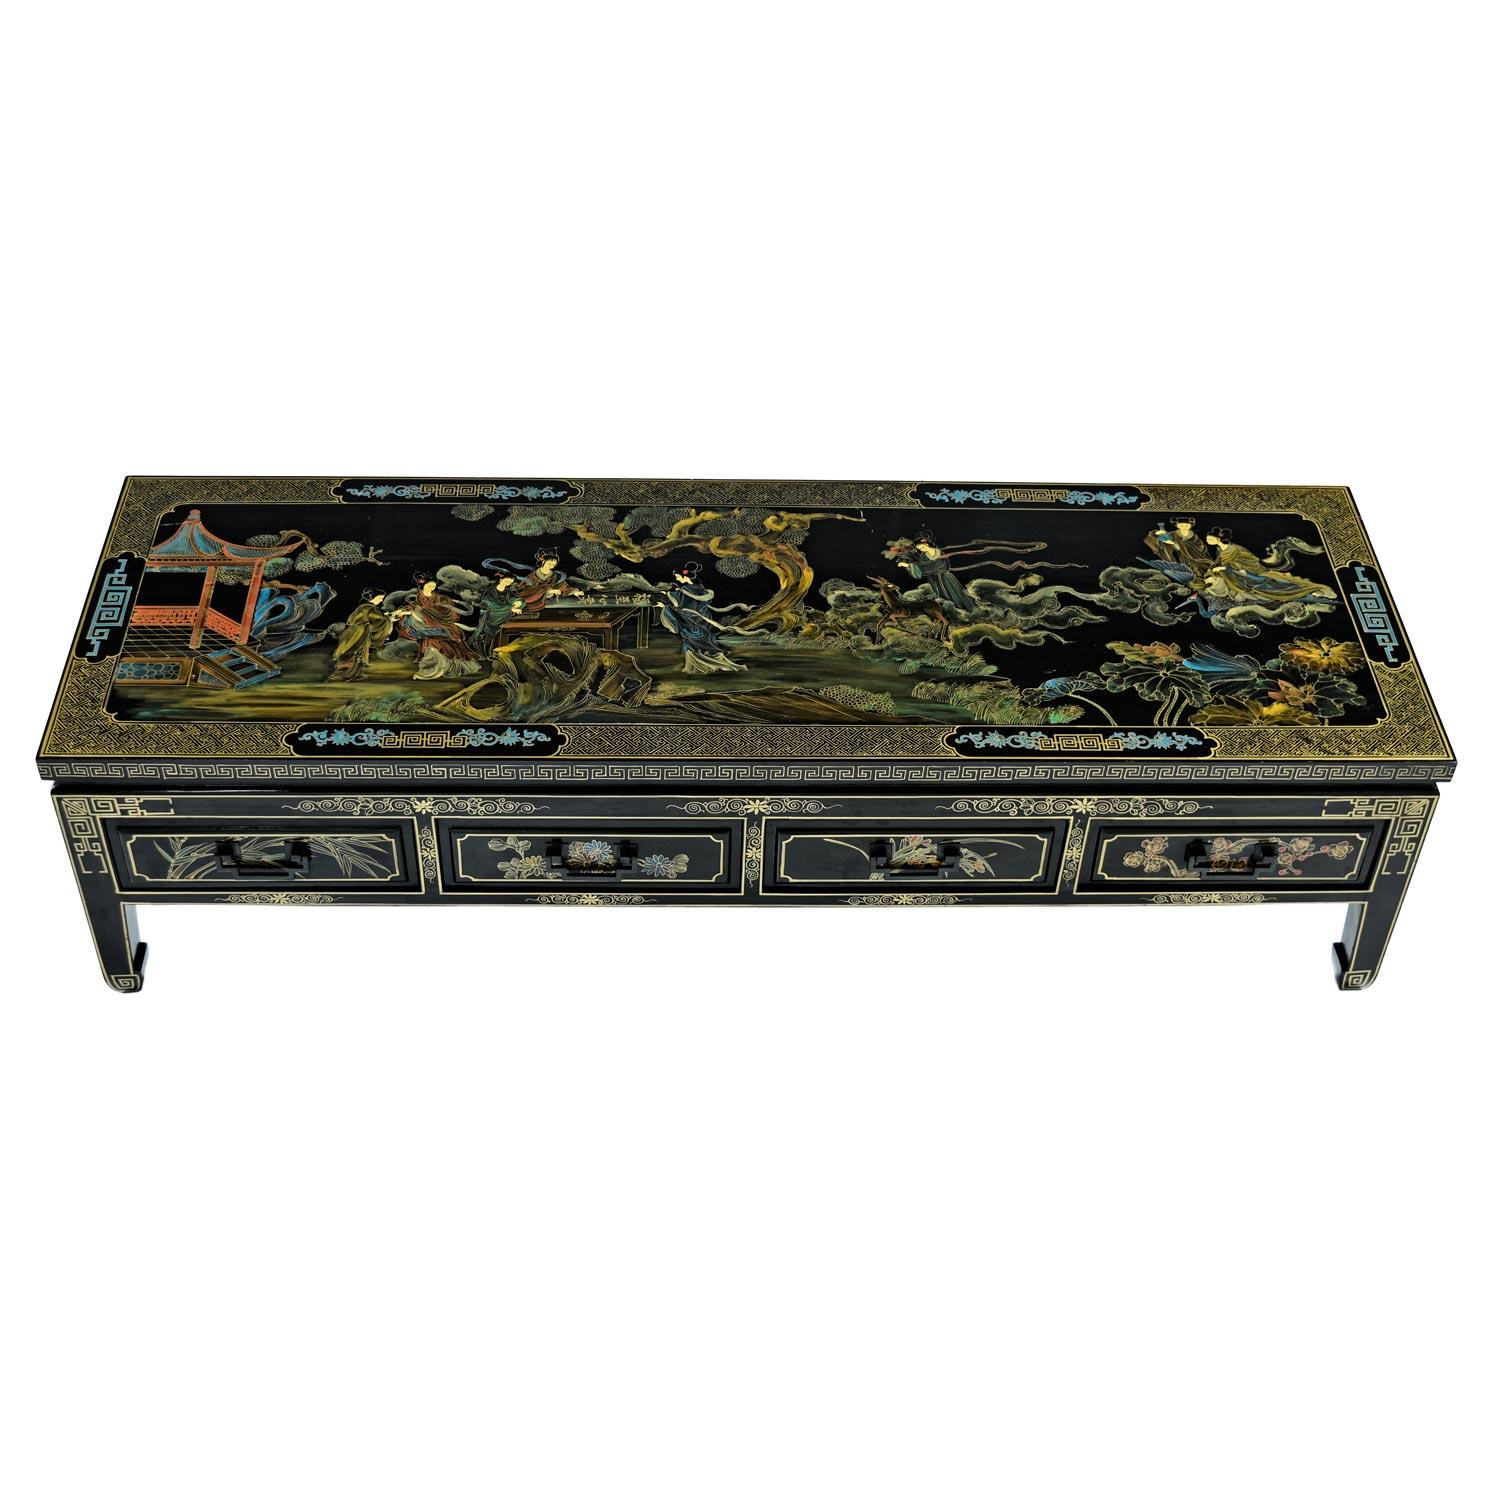 This incomparable chinoiserie coffee table sets the standard for this style. Timeless perfection. Just as fashionable now as they day it was made. We procured this from the son of the original owner. The hand painted motif can only be described as